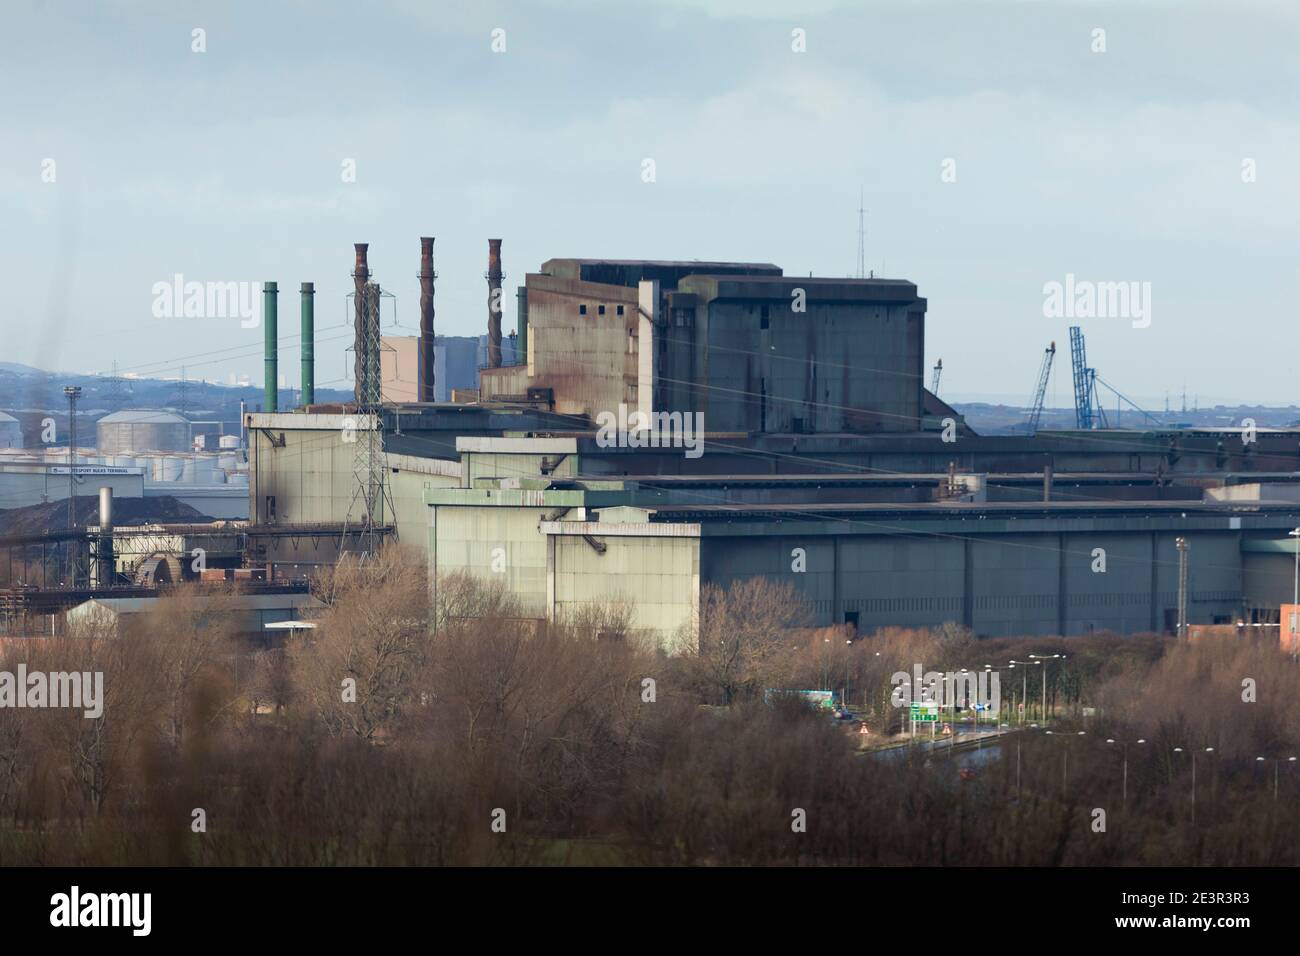 The Redcar Blast furnace, part of Teesside Steelworks. Once the second largest blast furnace in Europe. The steelworks closed in 2015, as a result of Stock Photo